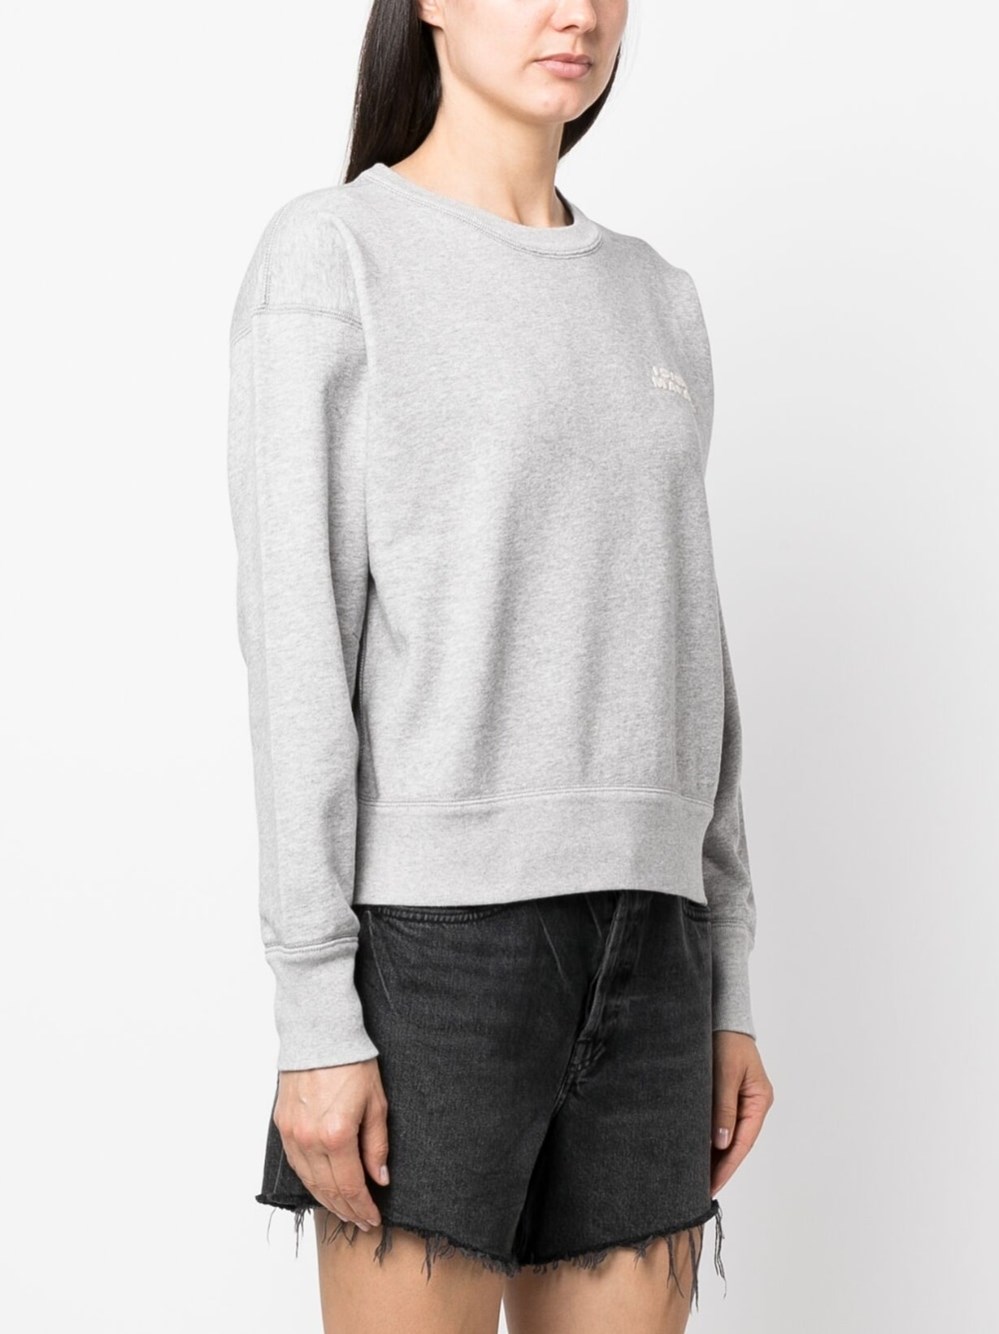 isabel marant SHADE SWEATER available on montiboutique.com - 54250